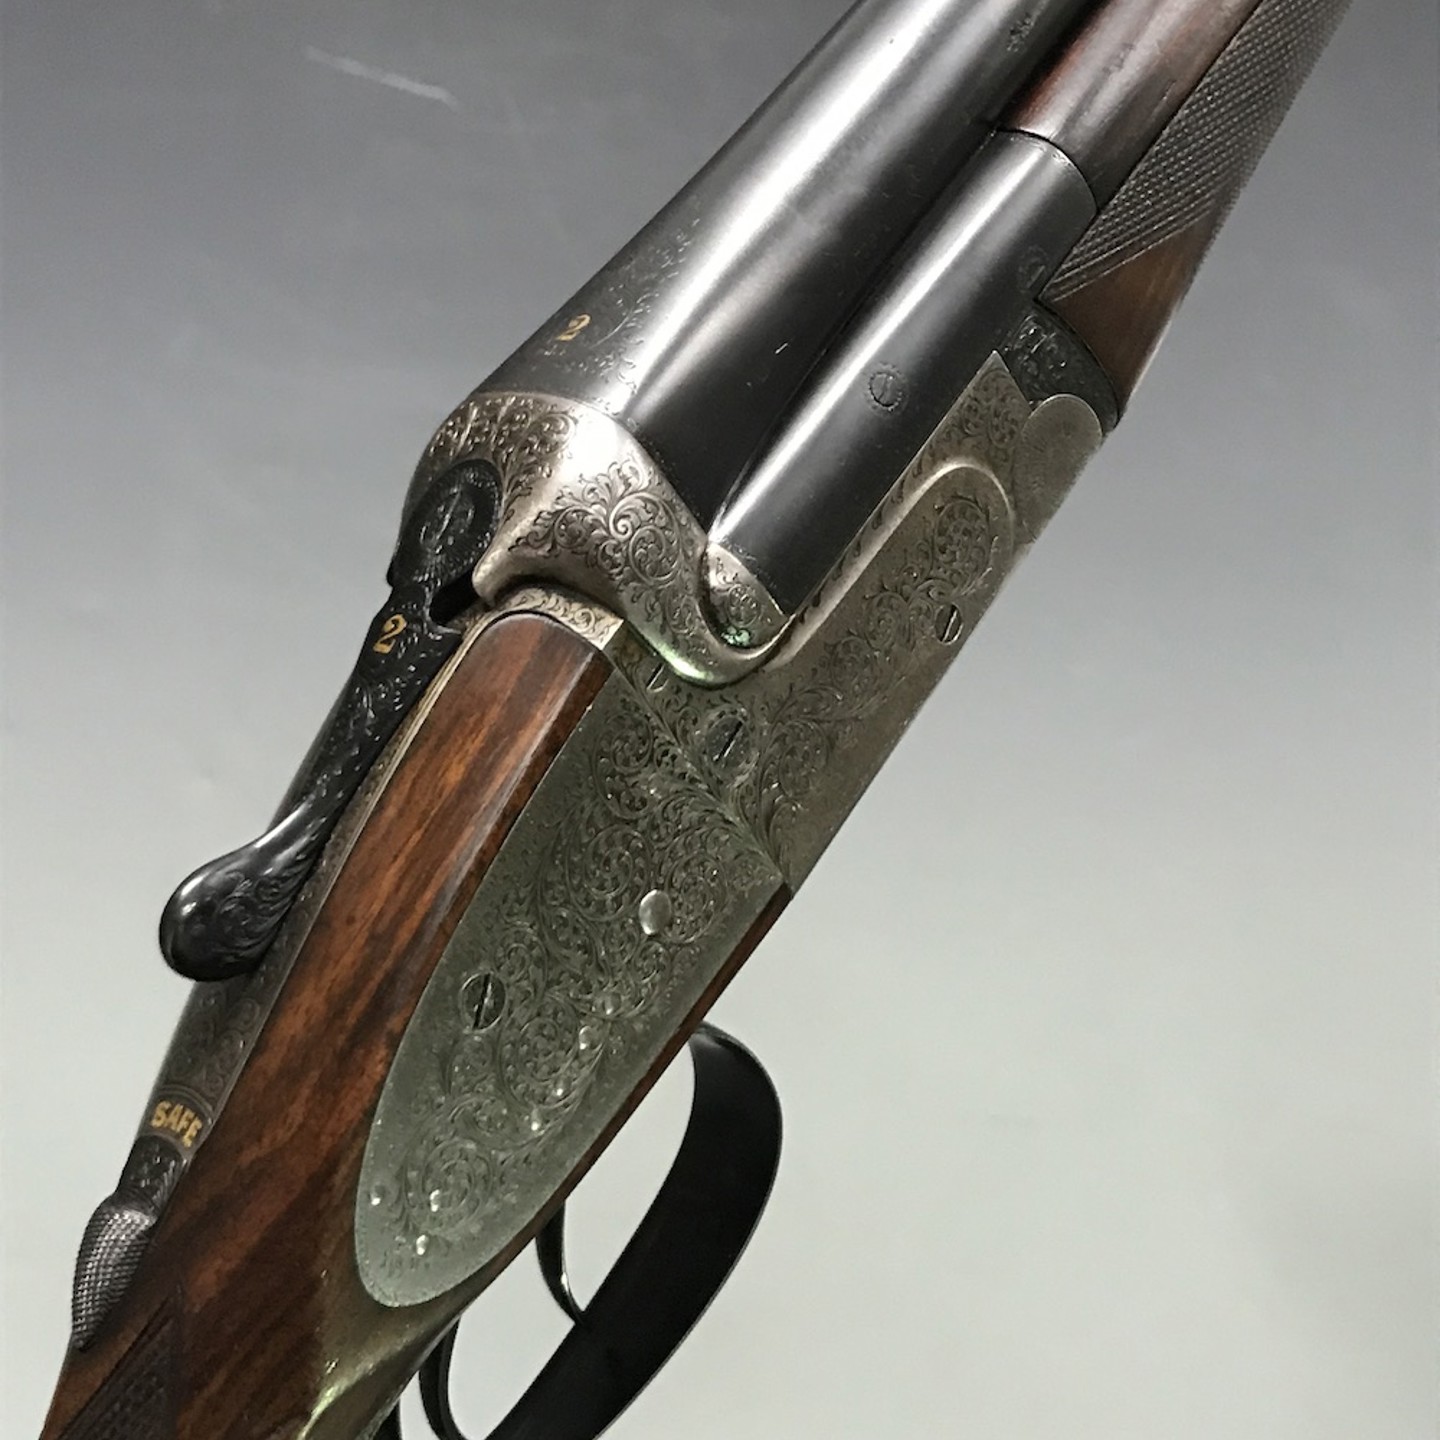 Edwinson Green Of Cheltenham And Gloucester 12 Bore Sidelock Ejector Over And Under Shotgun Ś5,200